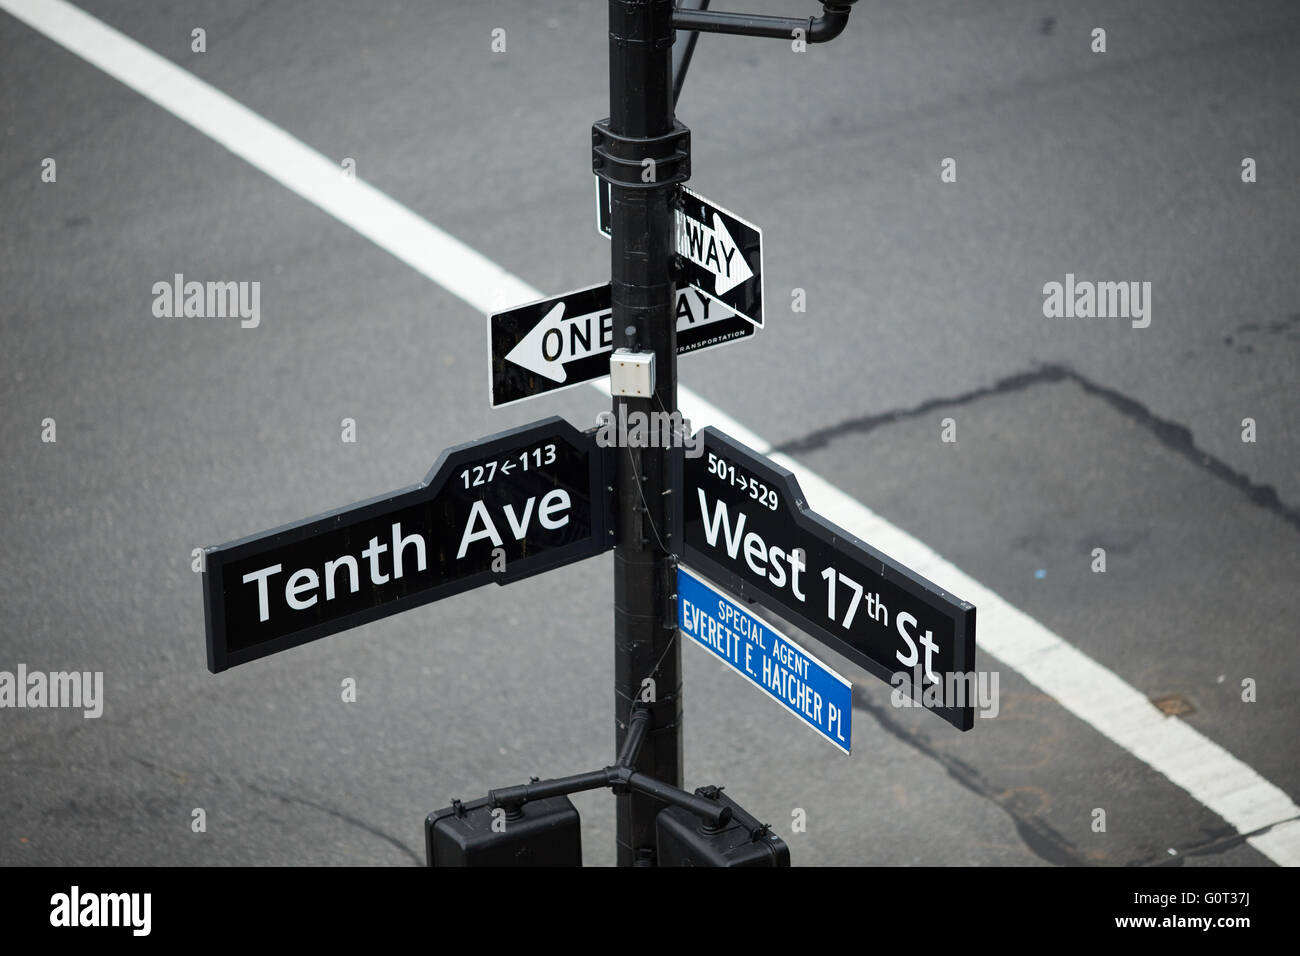 New york tenth ave west 17th street sign from  The High Line (also known as the High Line Park) is a linear park built in Manhat Stock Photo